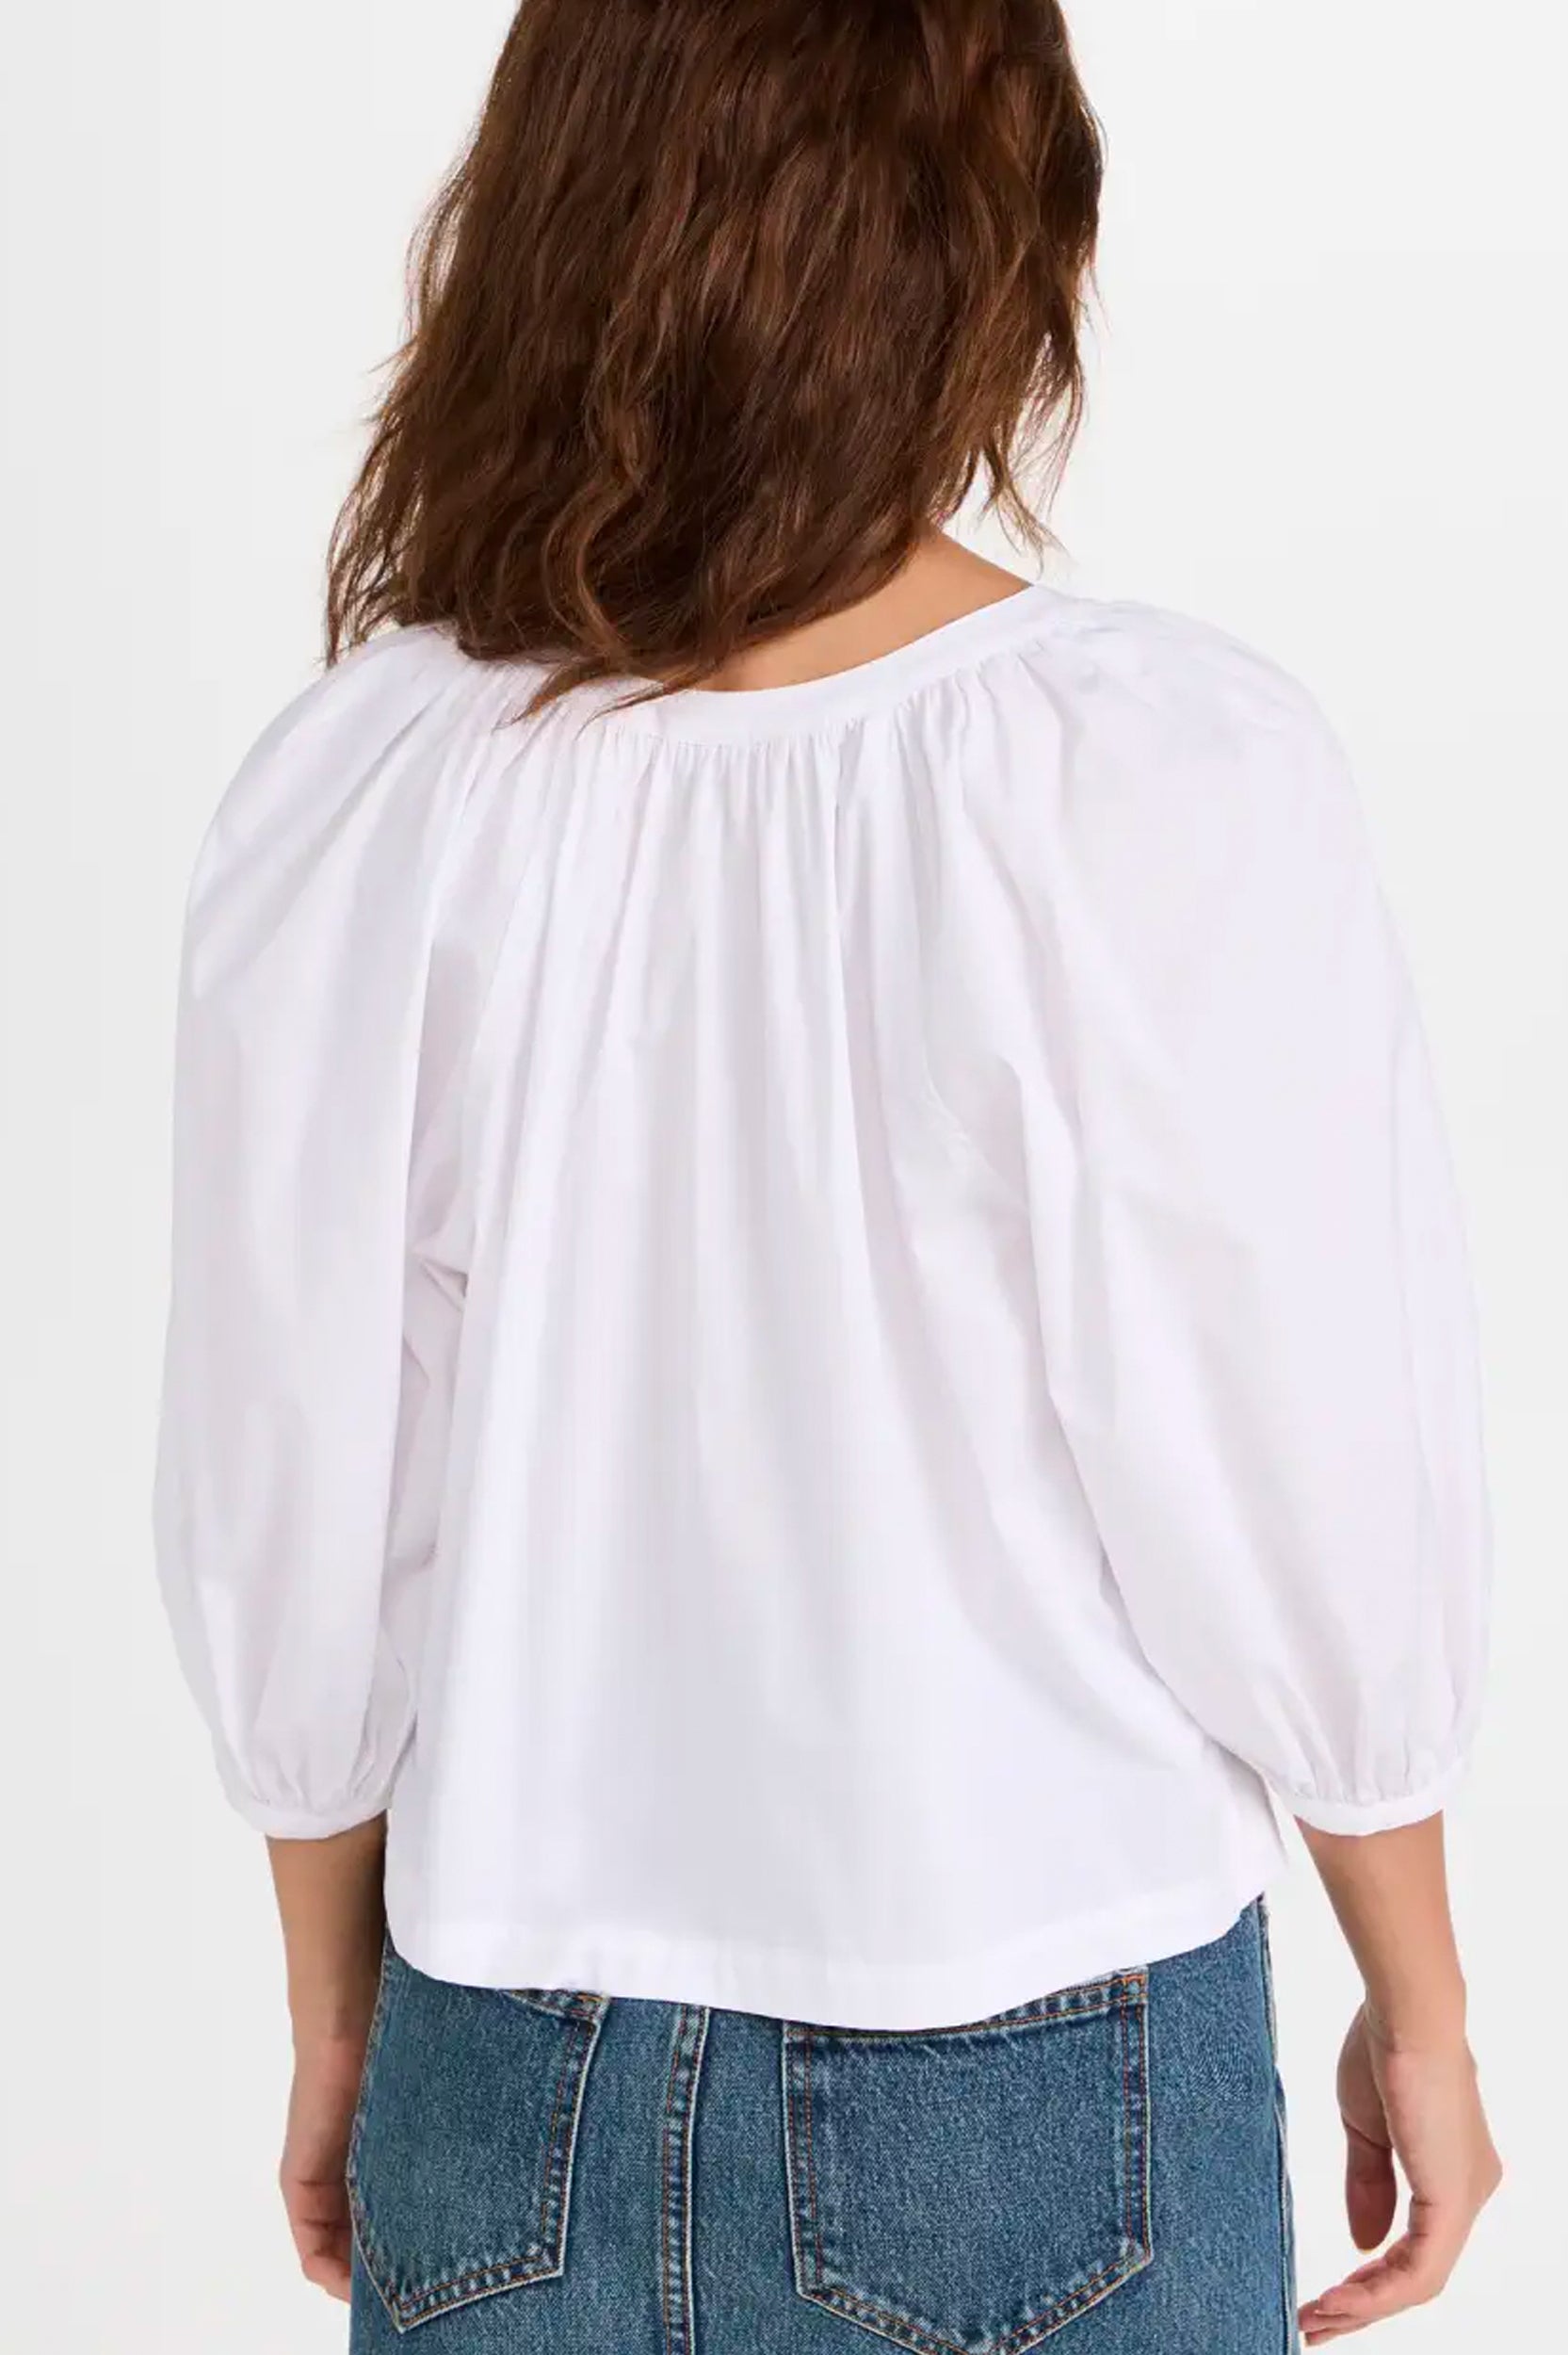 New Dill Top in White